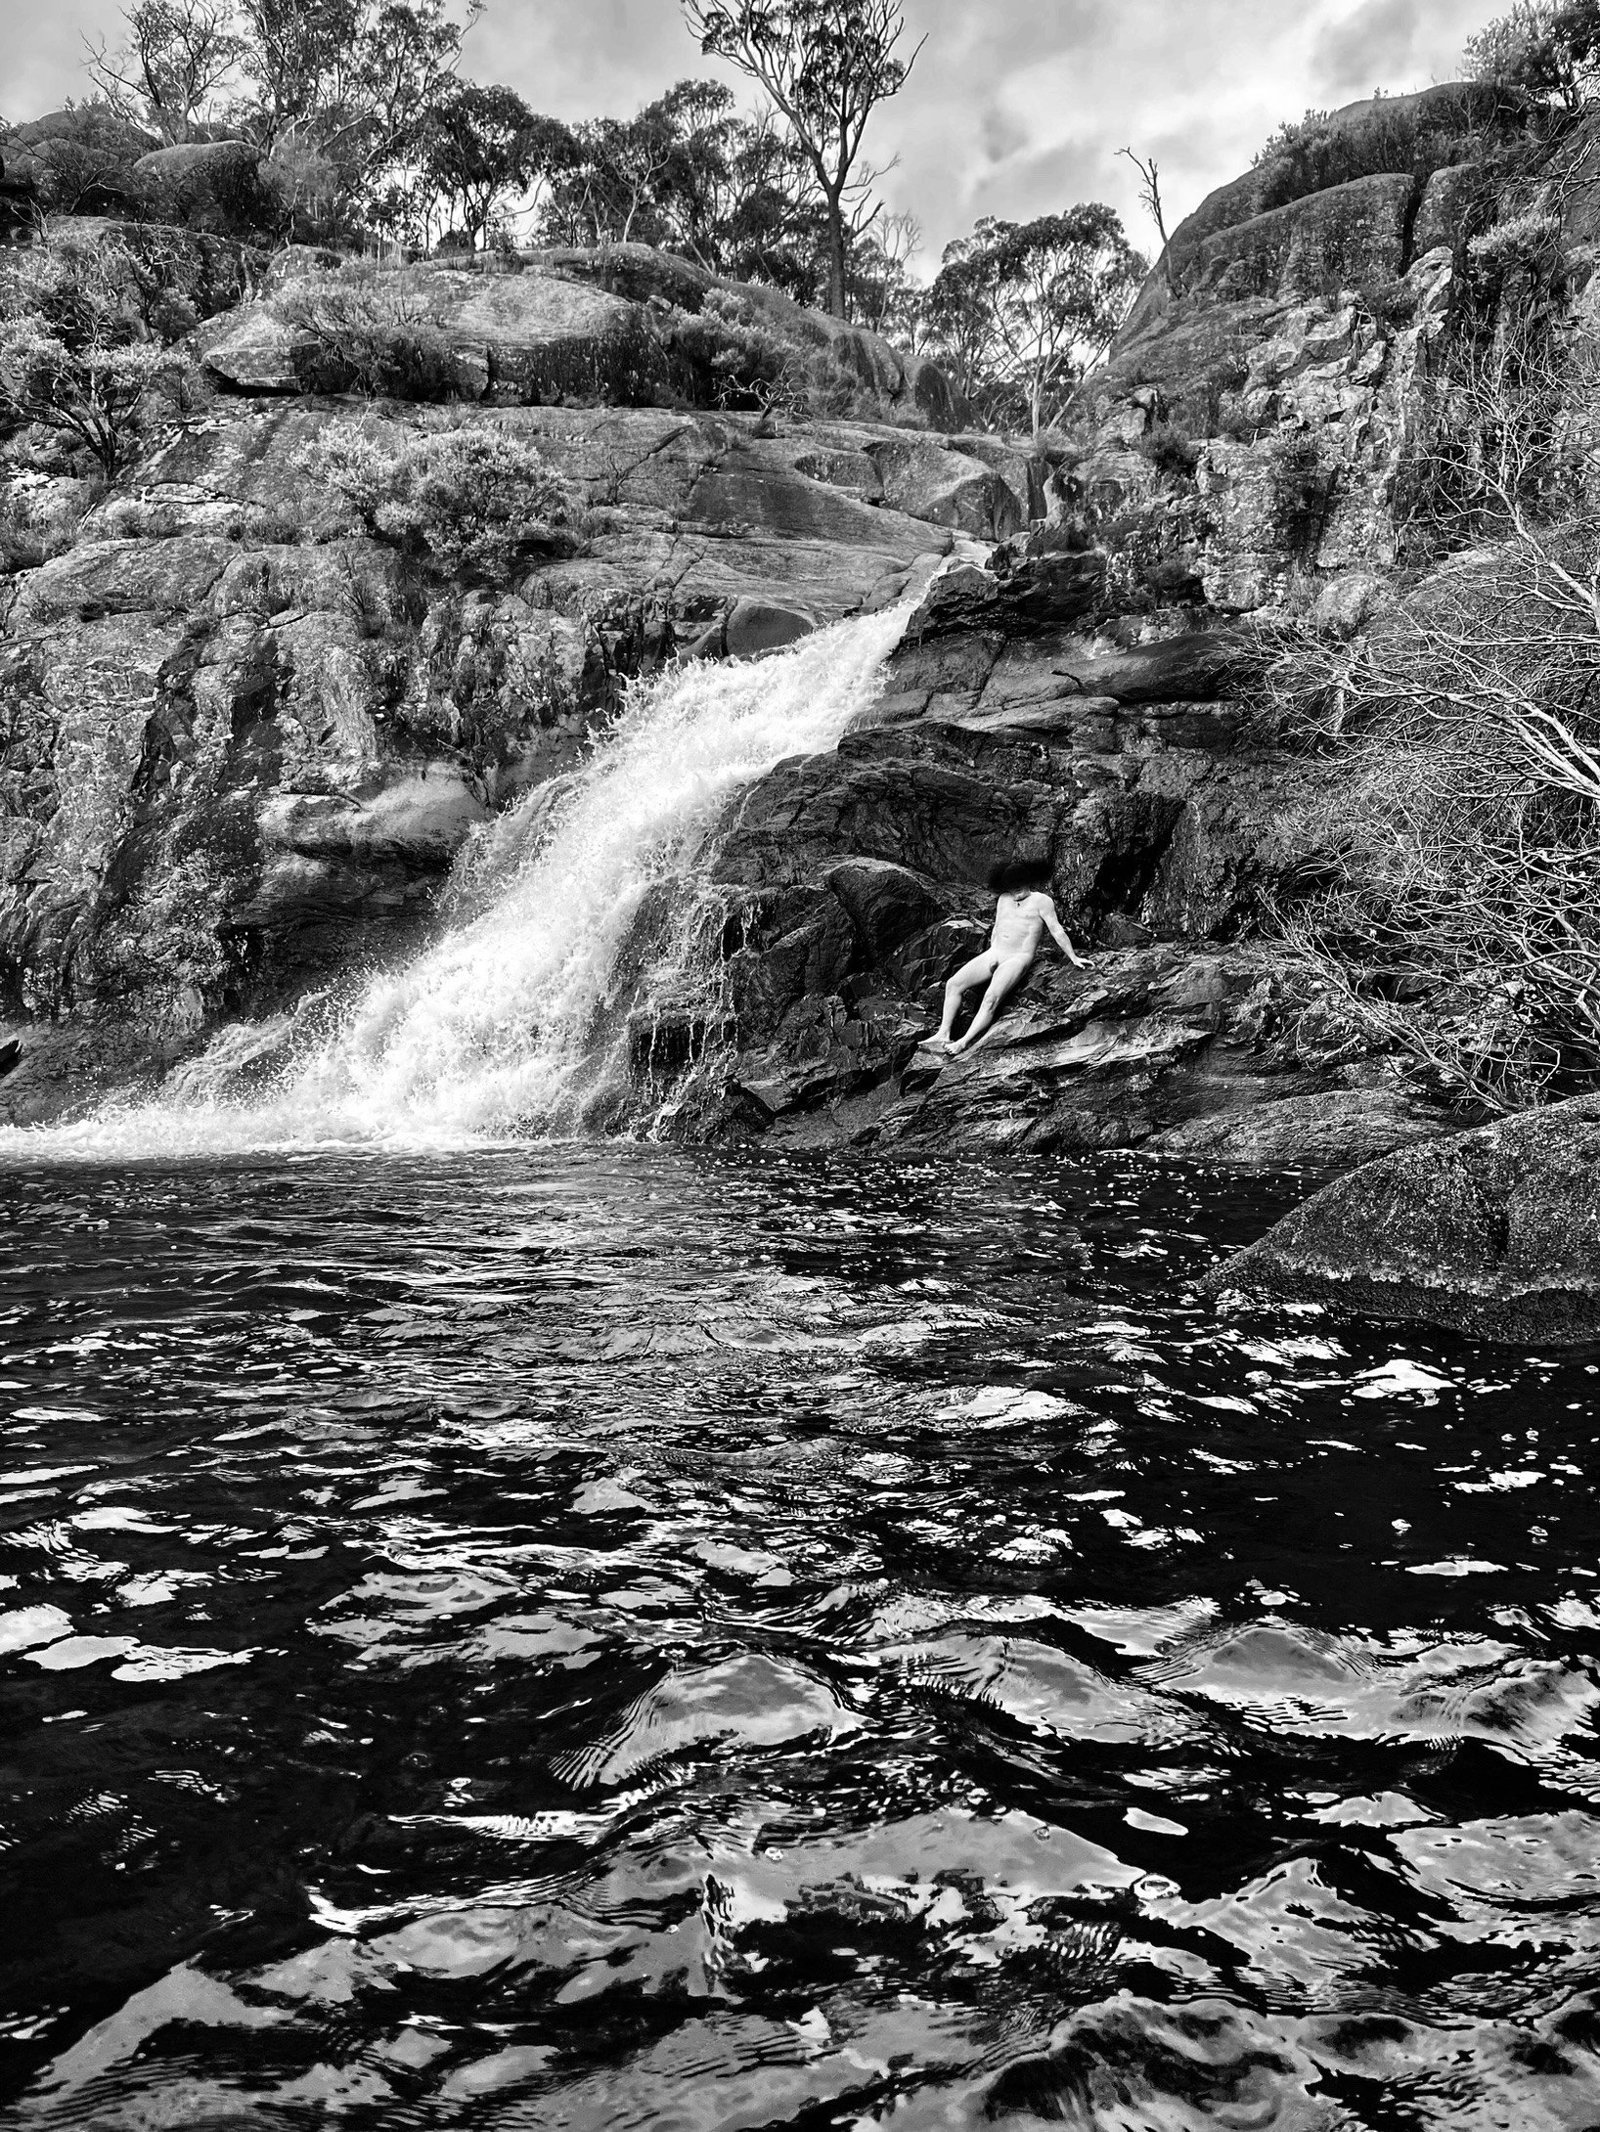 Photo by Nudehiker with the username @Nudehiker, who is a verified user,  December 1, 2022 at 8:30 AM. The post is about the topic Nudist Life and the text says 'Day Two Wild Swim.

Morong Falls, Kanangra Boyd NP, NSW Australia. 

A mtn bike ride to an amazing set of falls'